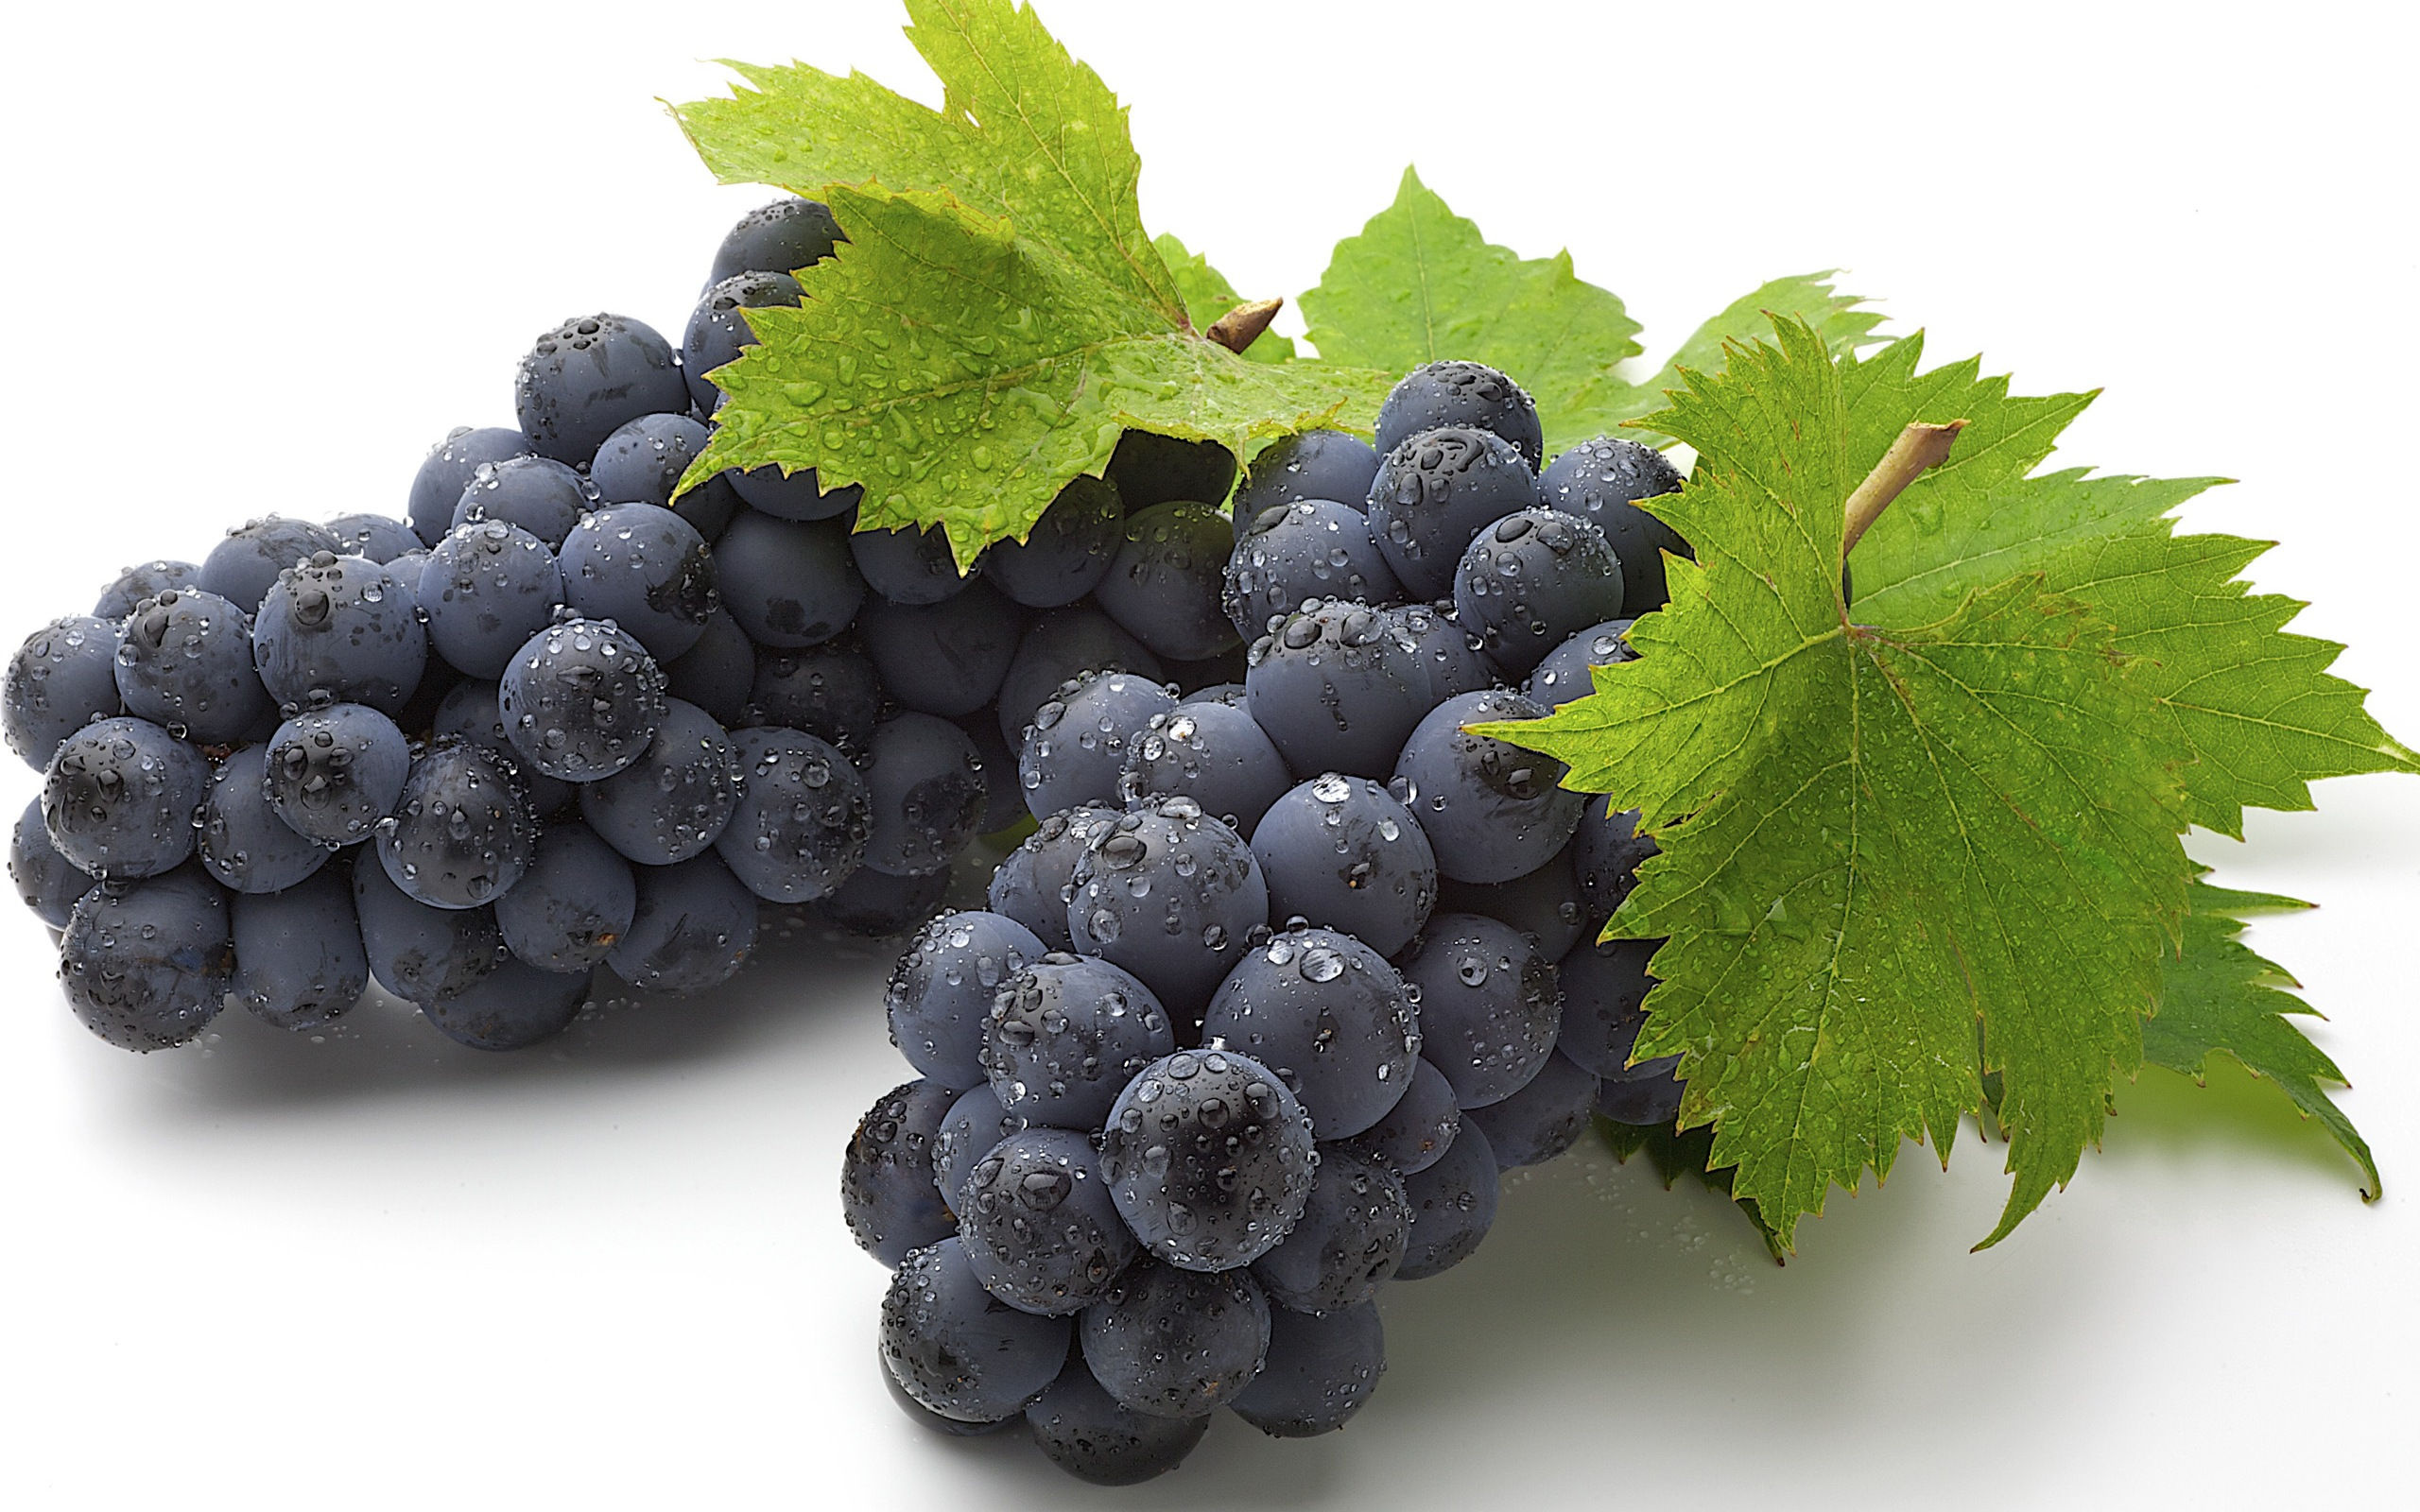 Grapes: Contain powerful antioxidants known as polyphenols. 2560x1600 HD Background.